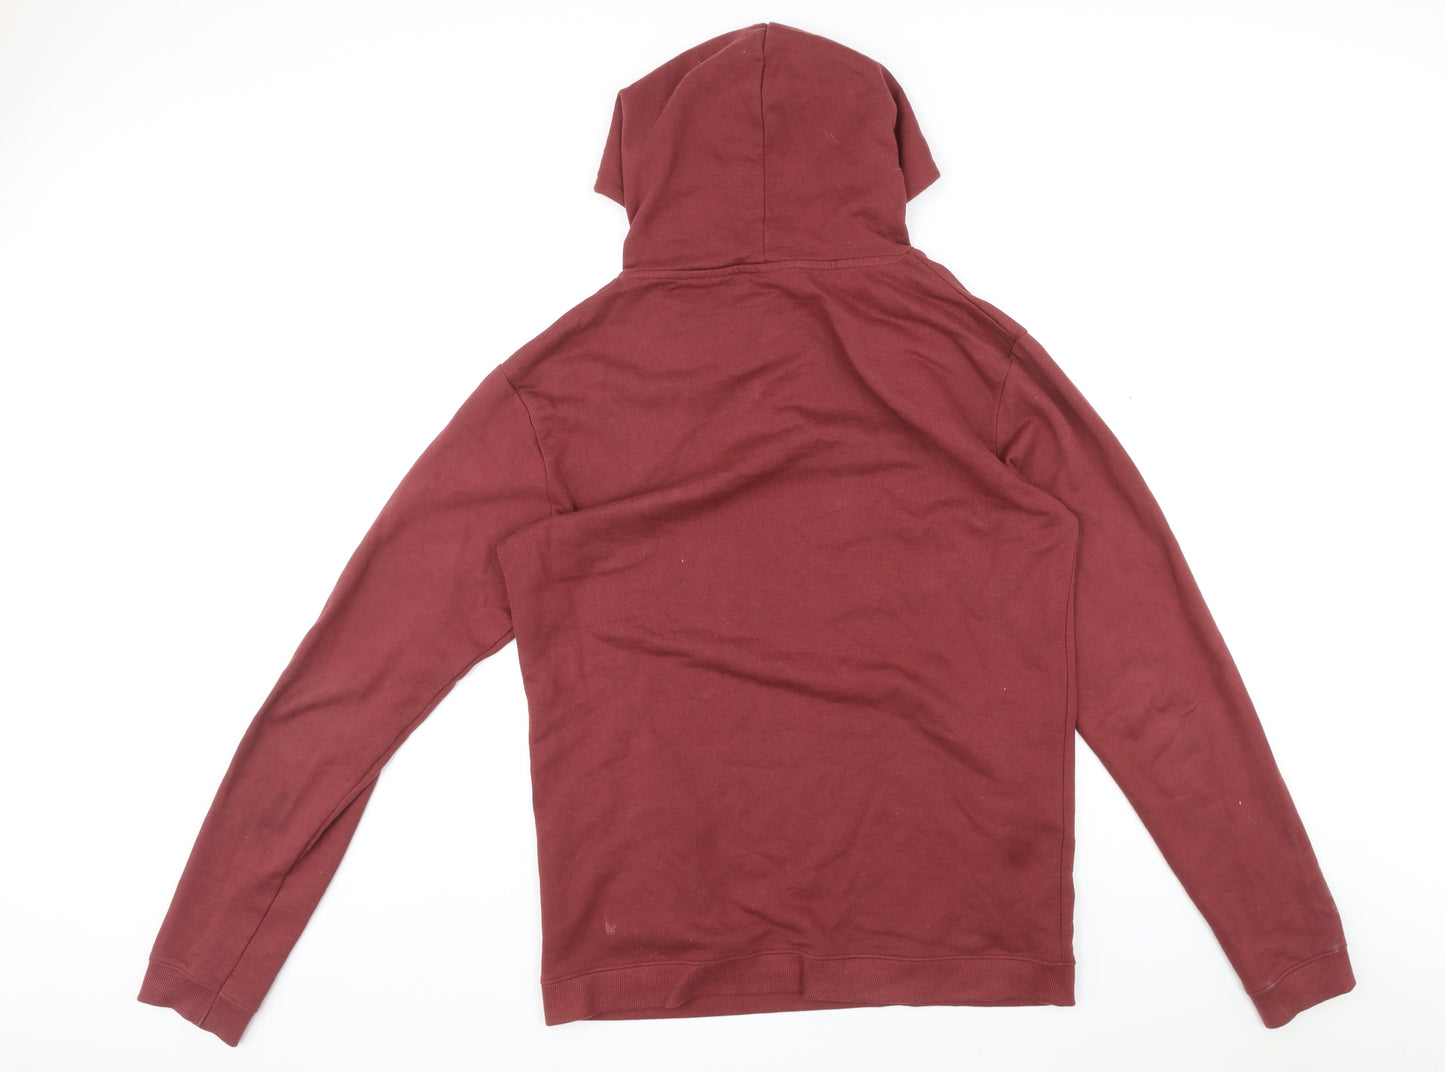 Rapanui Mens Red Cotton Pullover Hoodie Size L - Drawstrings, Pocket